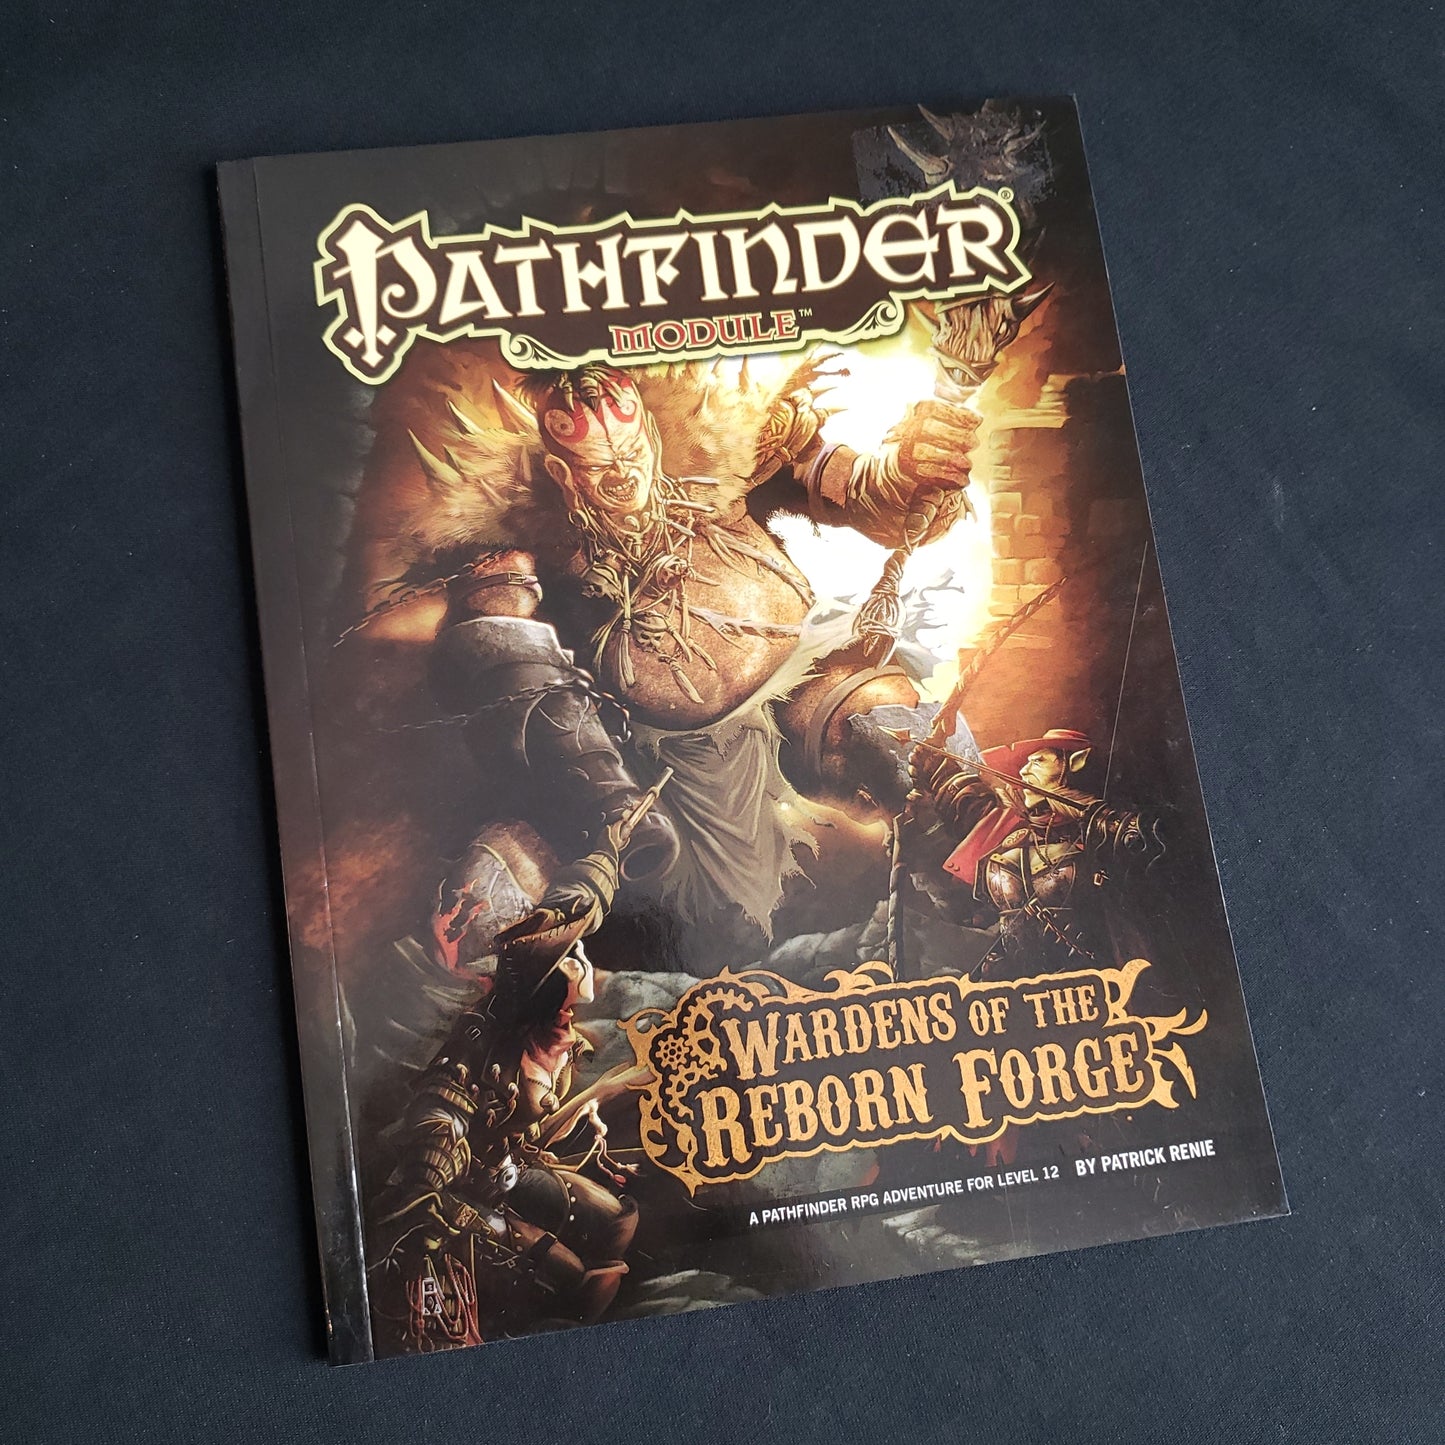 Image shows the front cover of the Wardens of the Reborn Forge book for the Pathfinder 1E roleplaying game